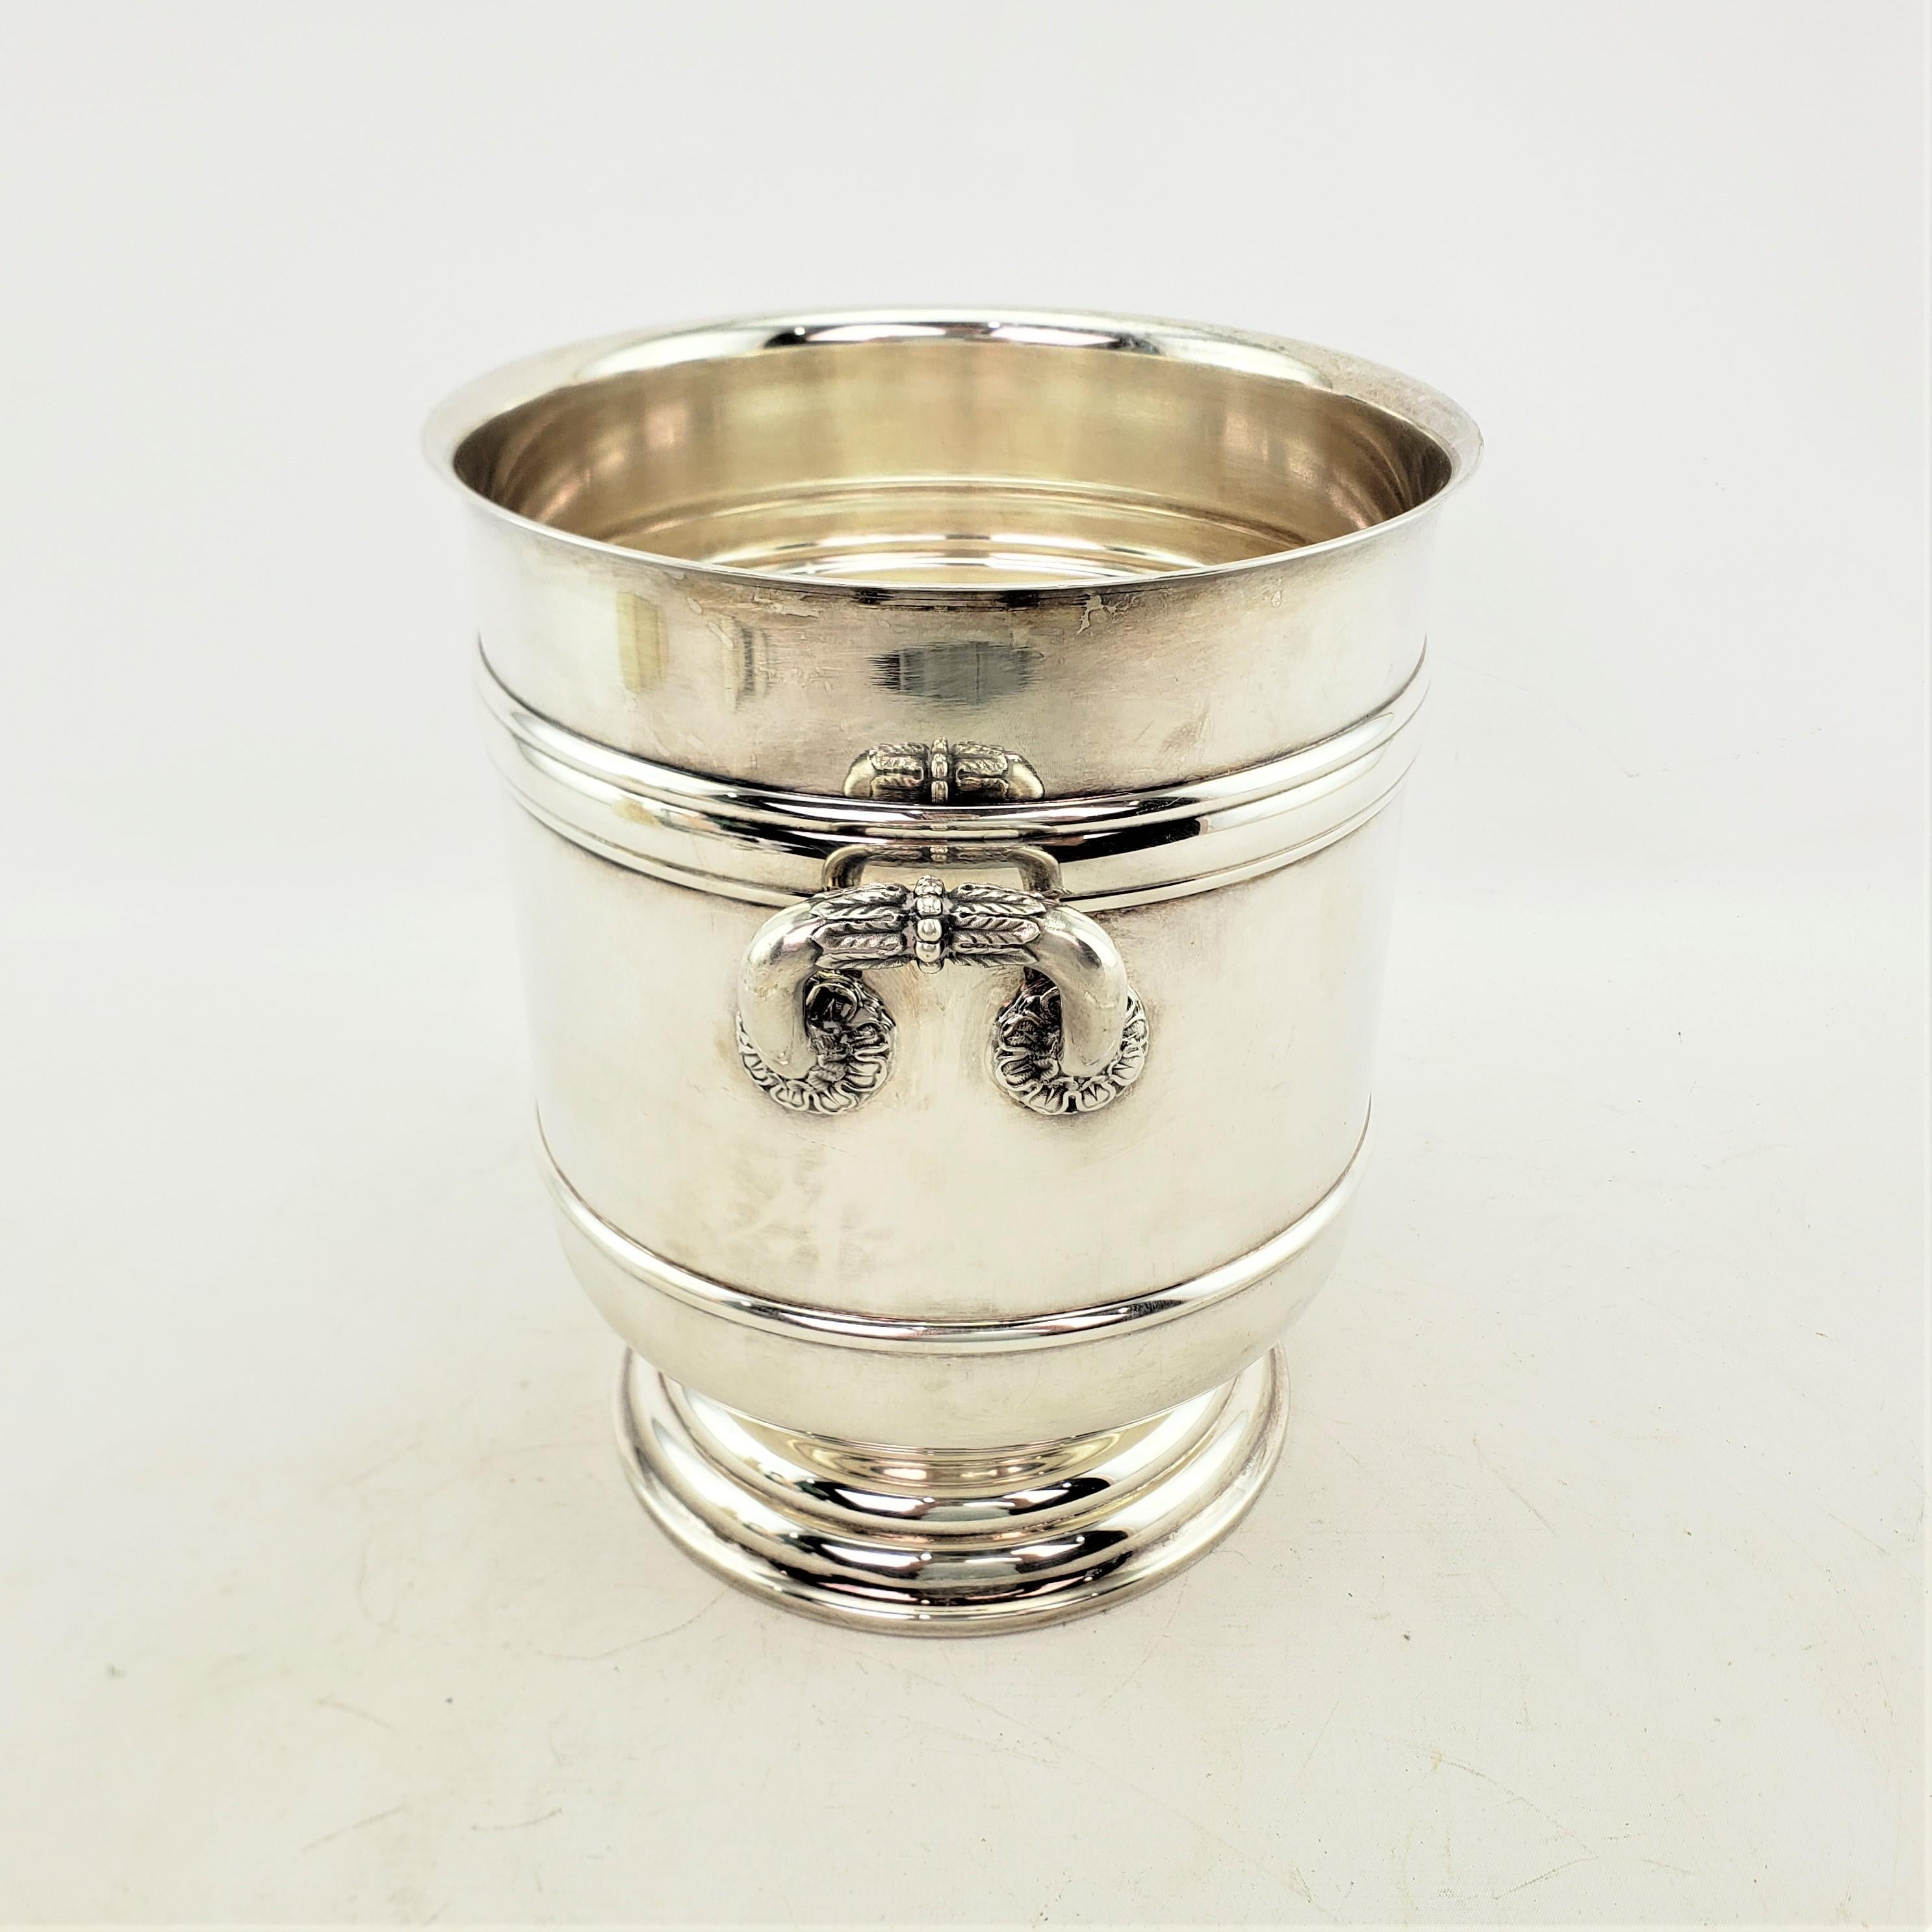 Art Deco Mid-Century Era Christofle Silver Plated Ice Bucket or Bottle Chiller For Sale